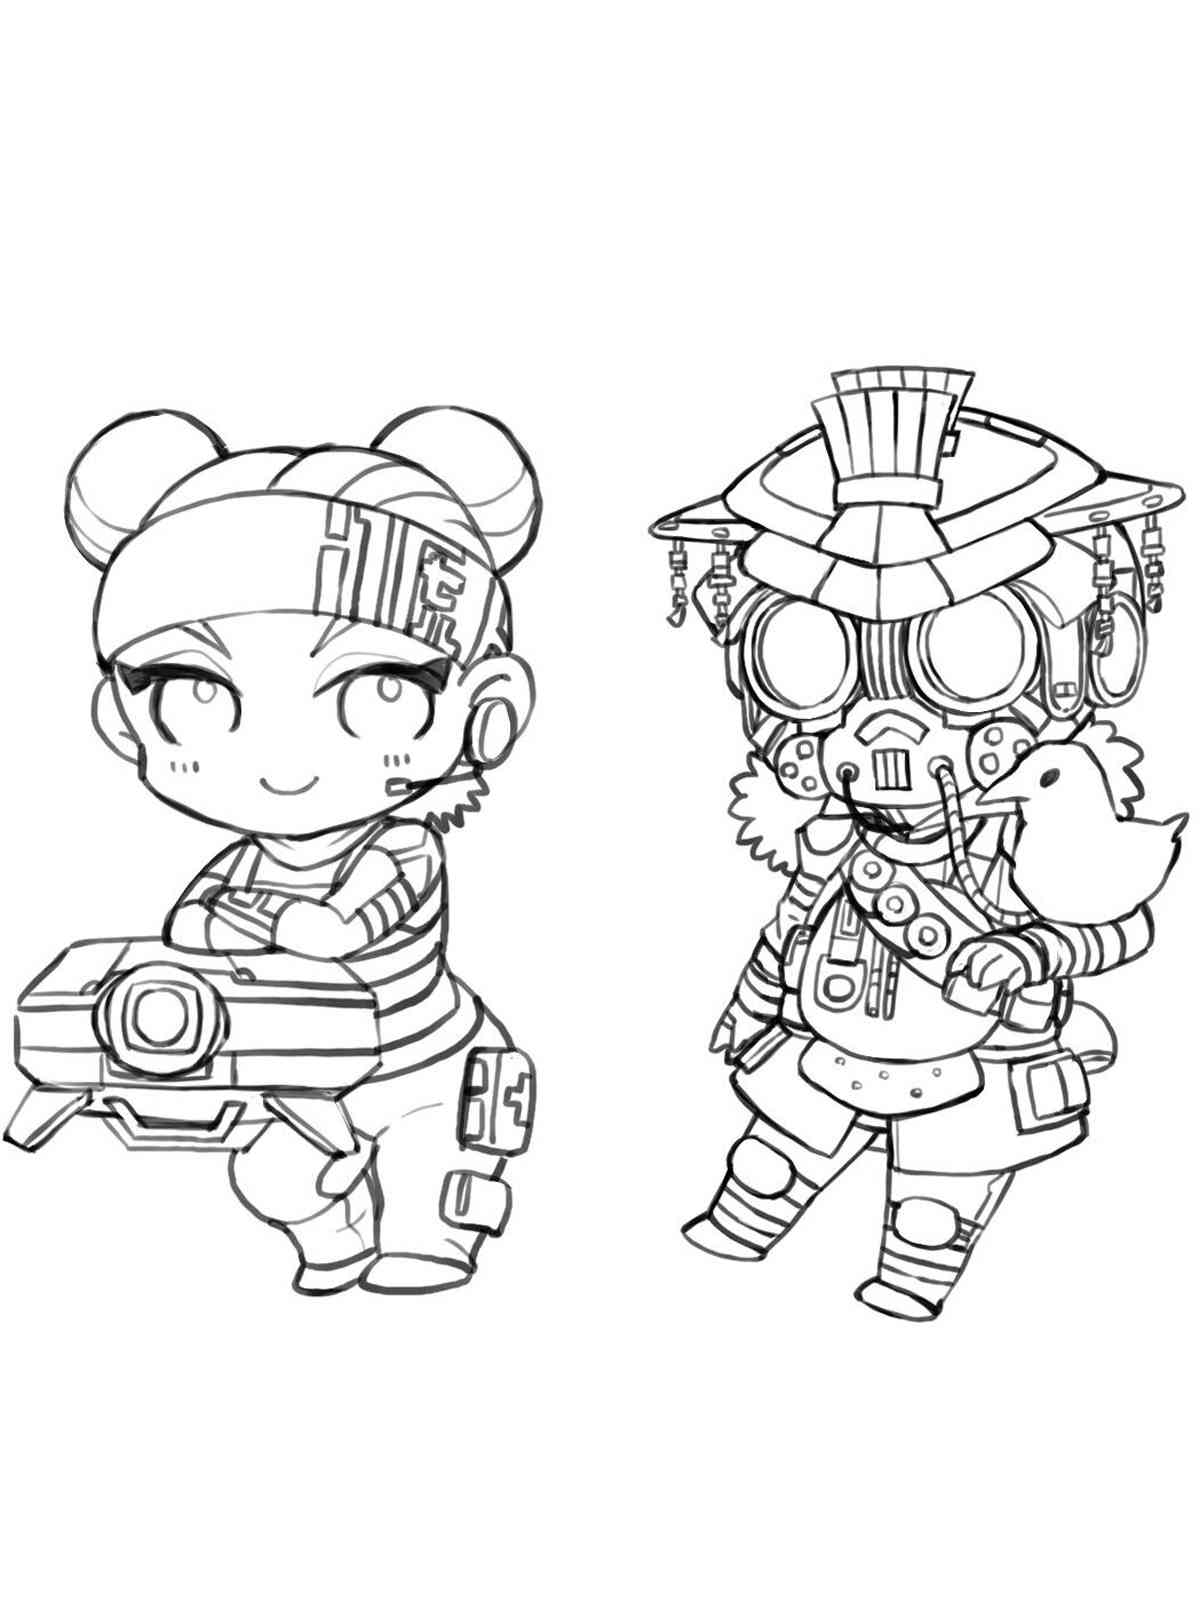 Bloodhound and Lifeline Apex Legends coloring page